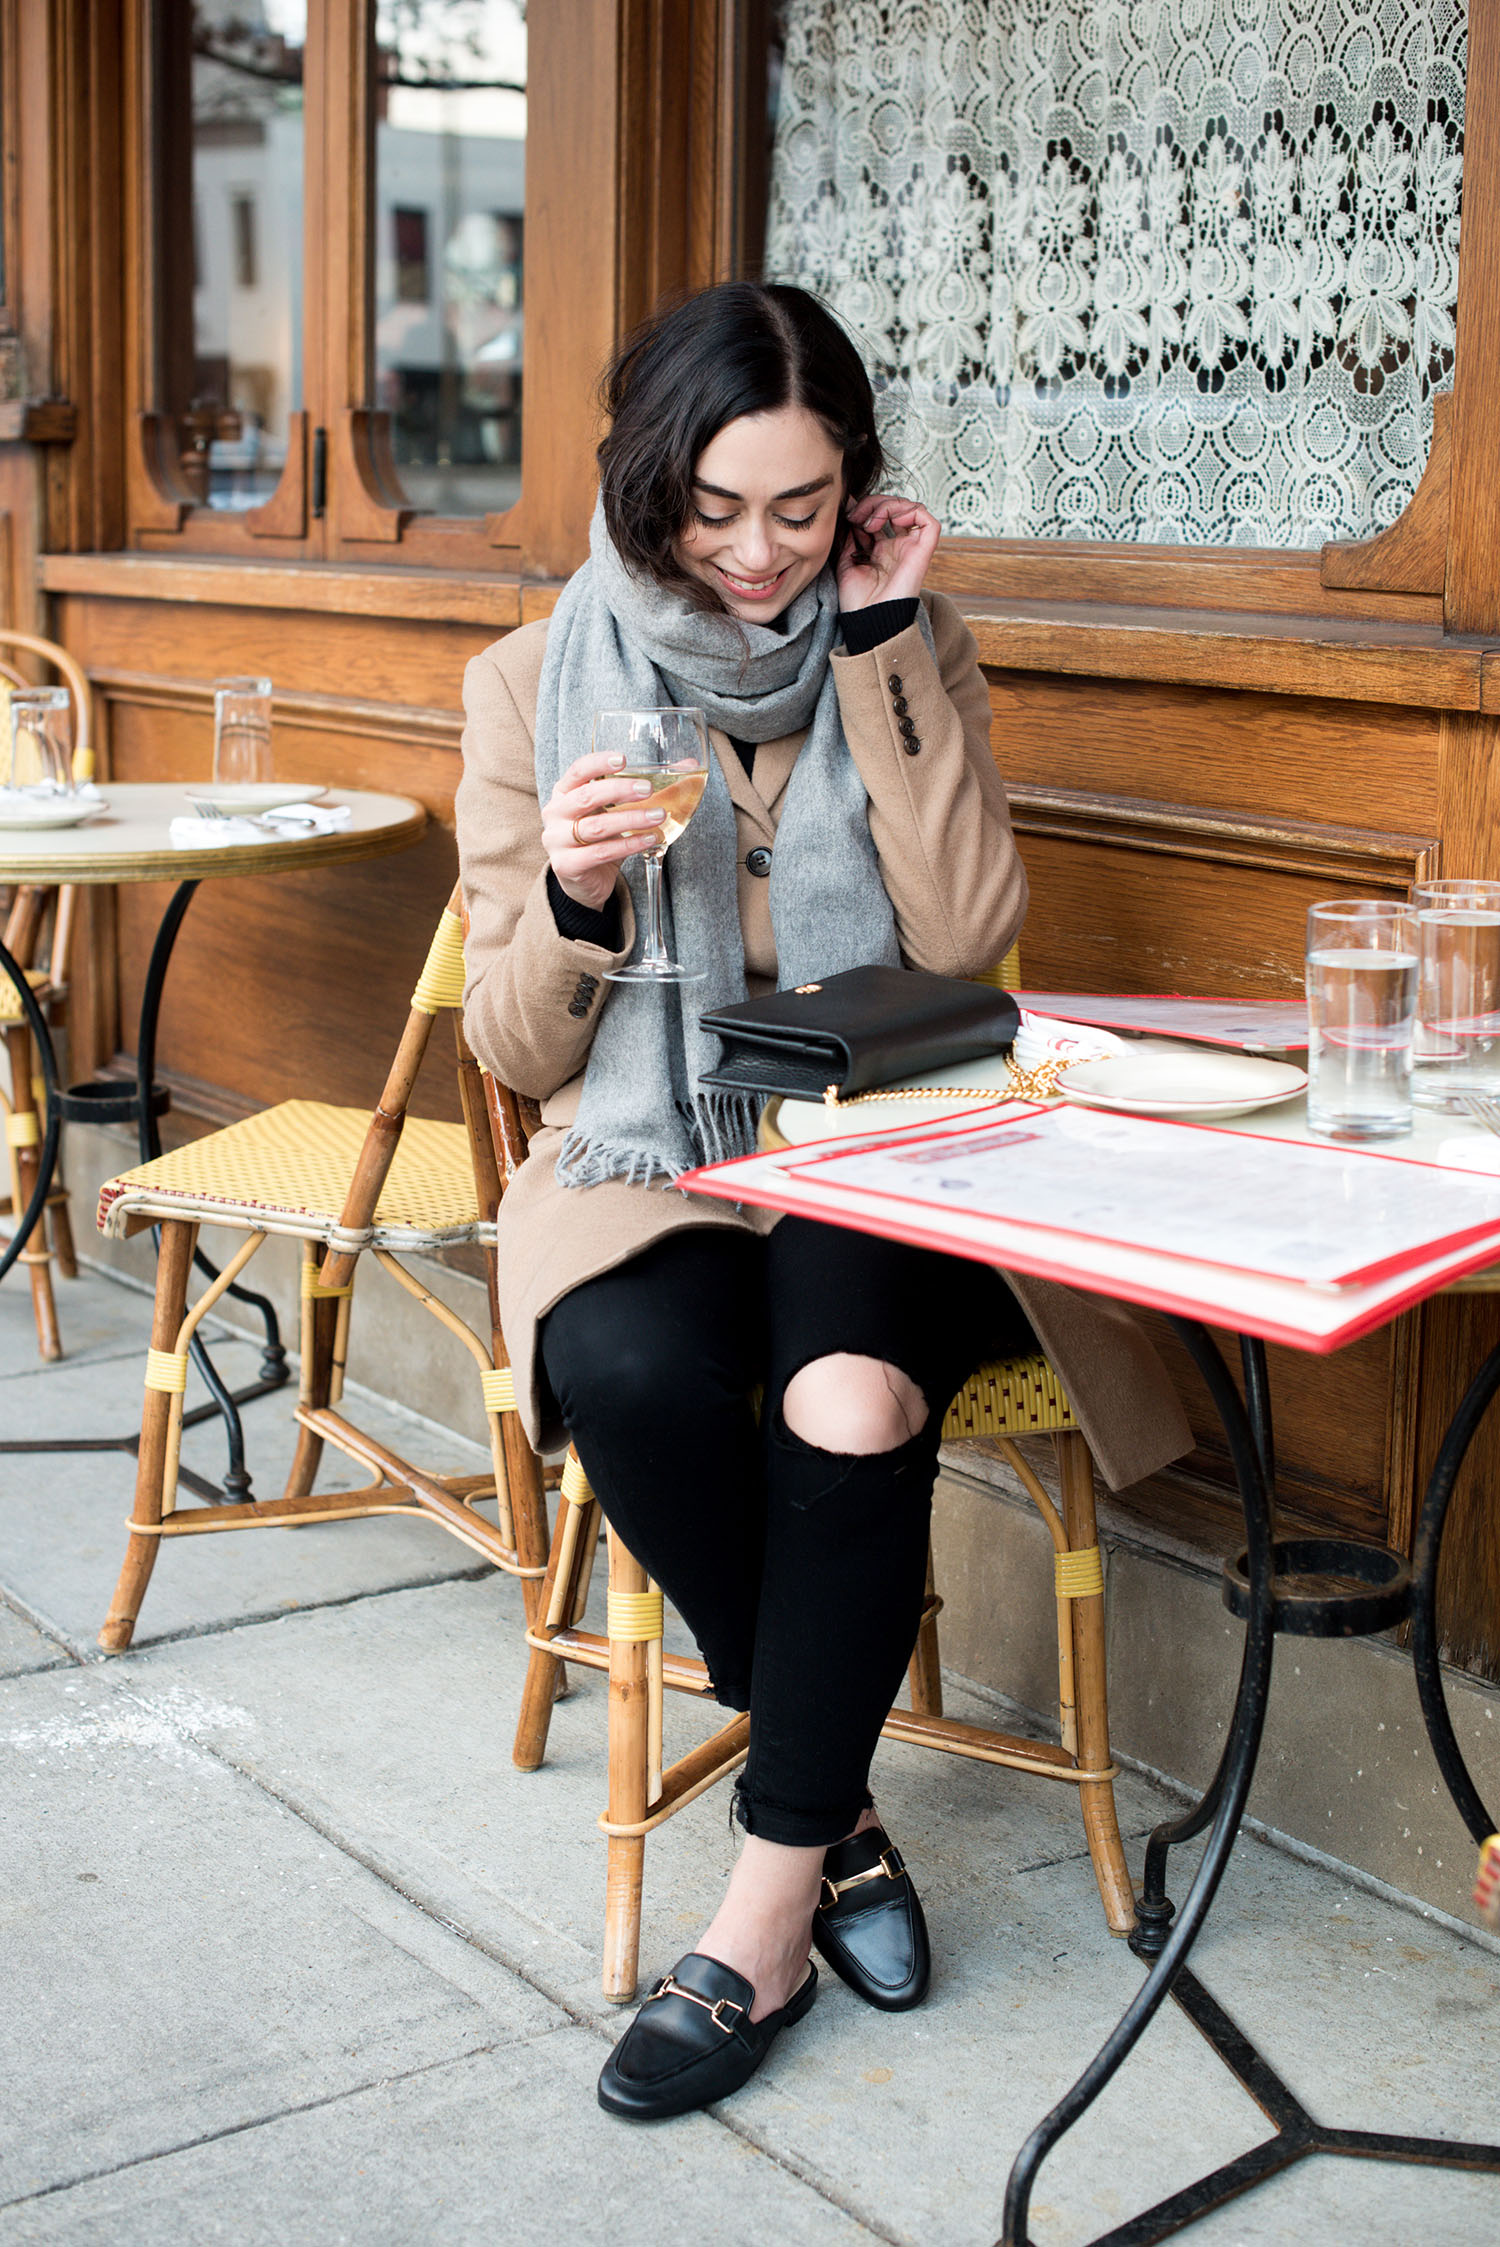 Canadian fashion blogger Cee Fardoe of Coco & Vera drinks wine at Le Diplomate wearing a Uniqlo camel coat and Paige black jeans